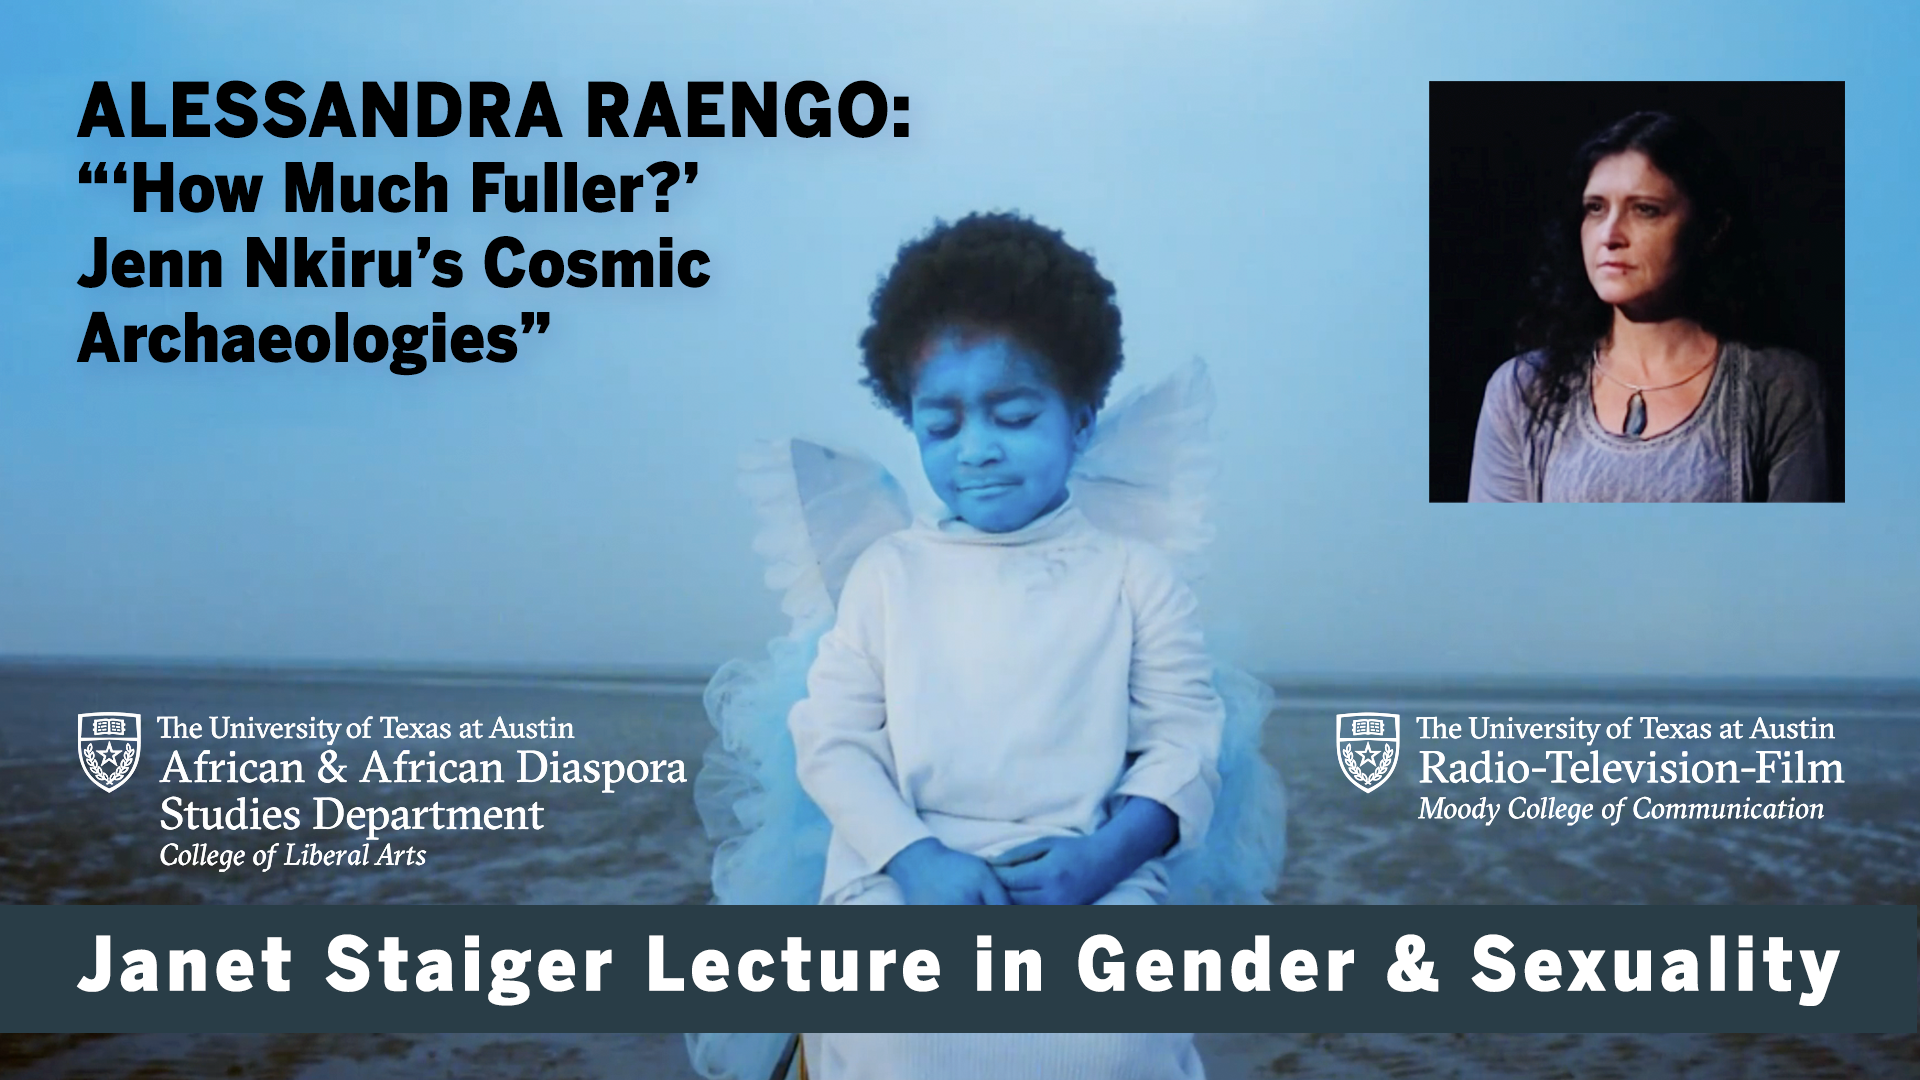 mar28_staiger_lecture_alessandra_raengo